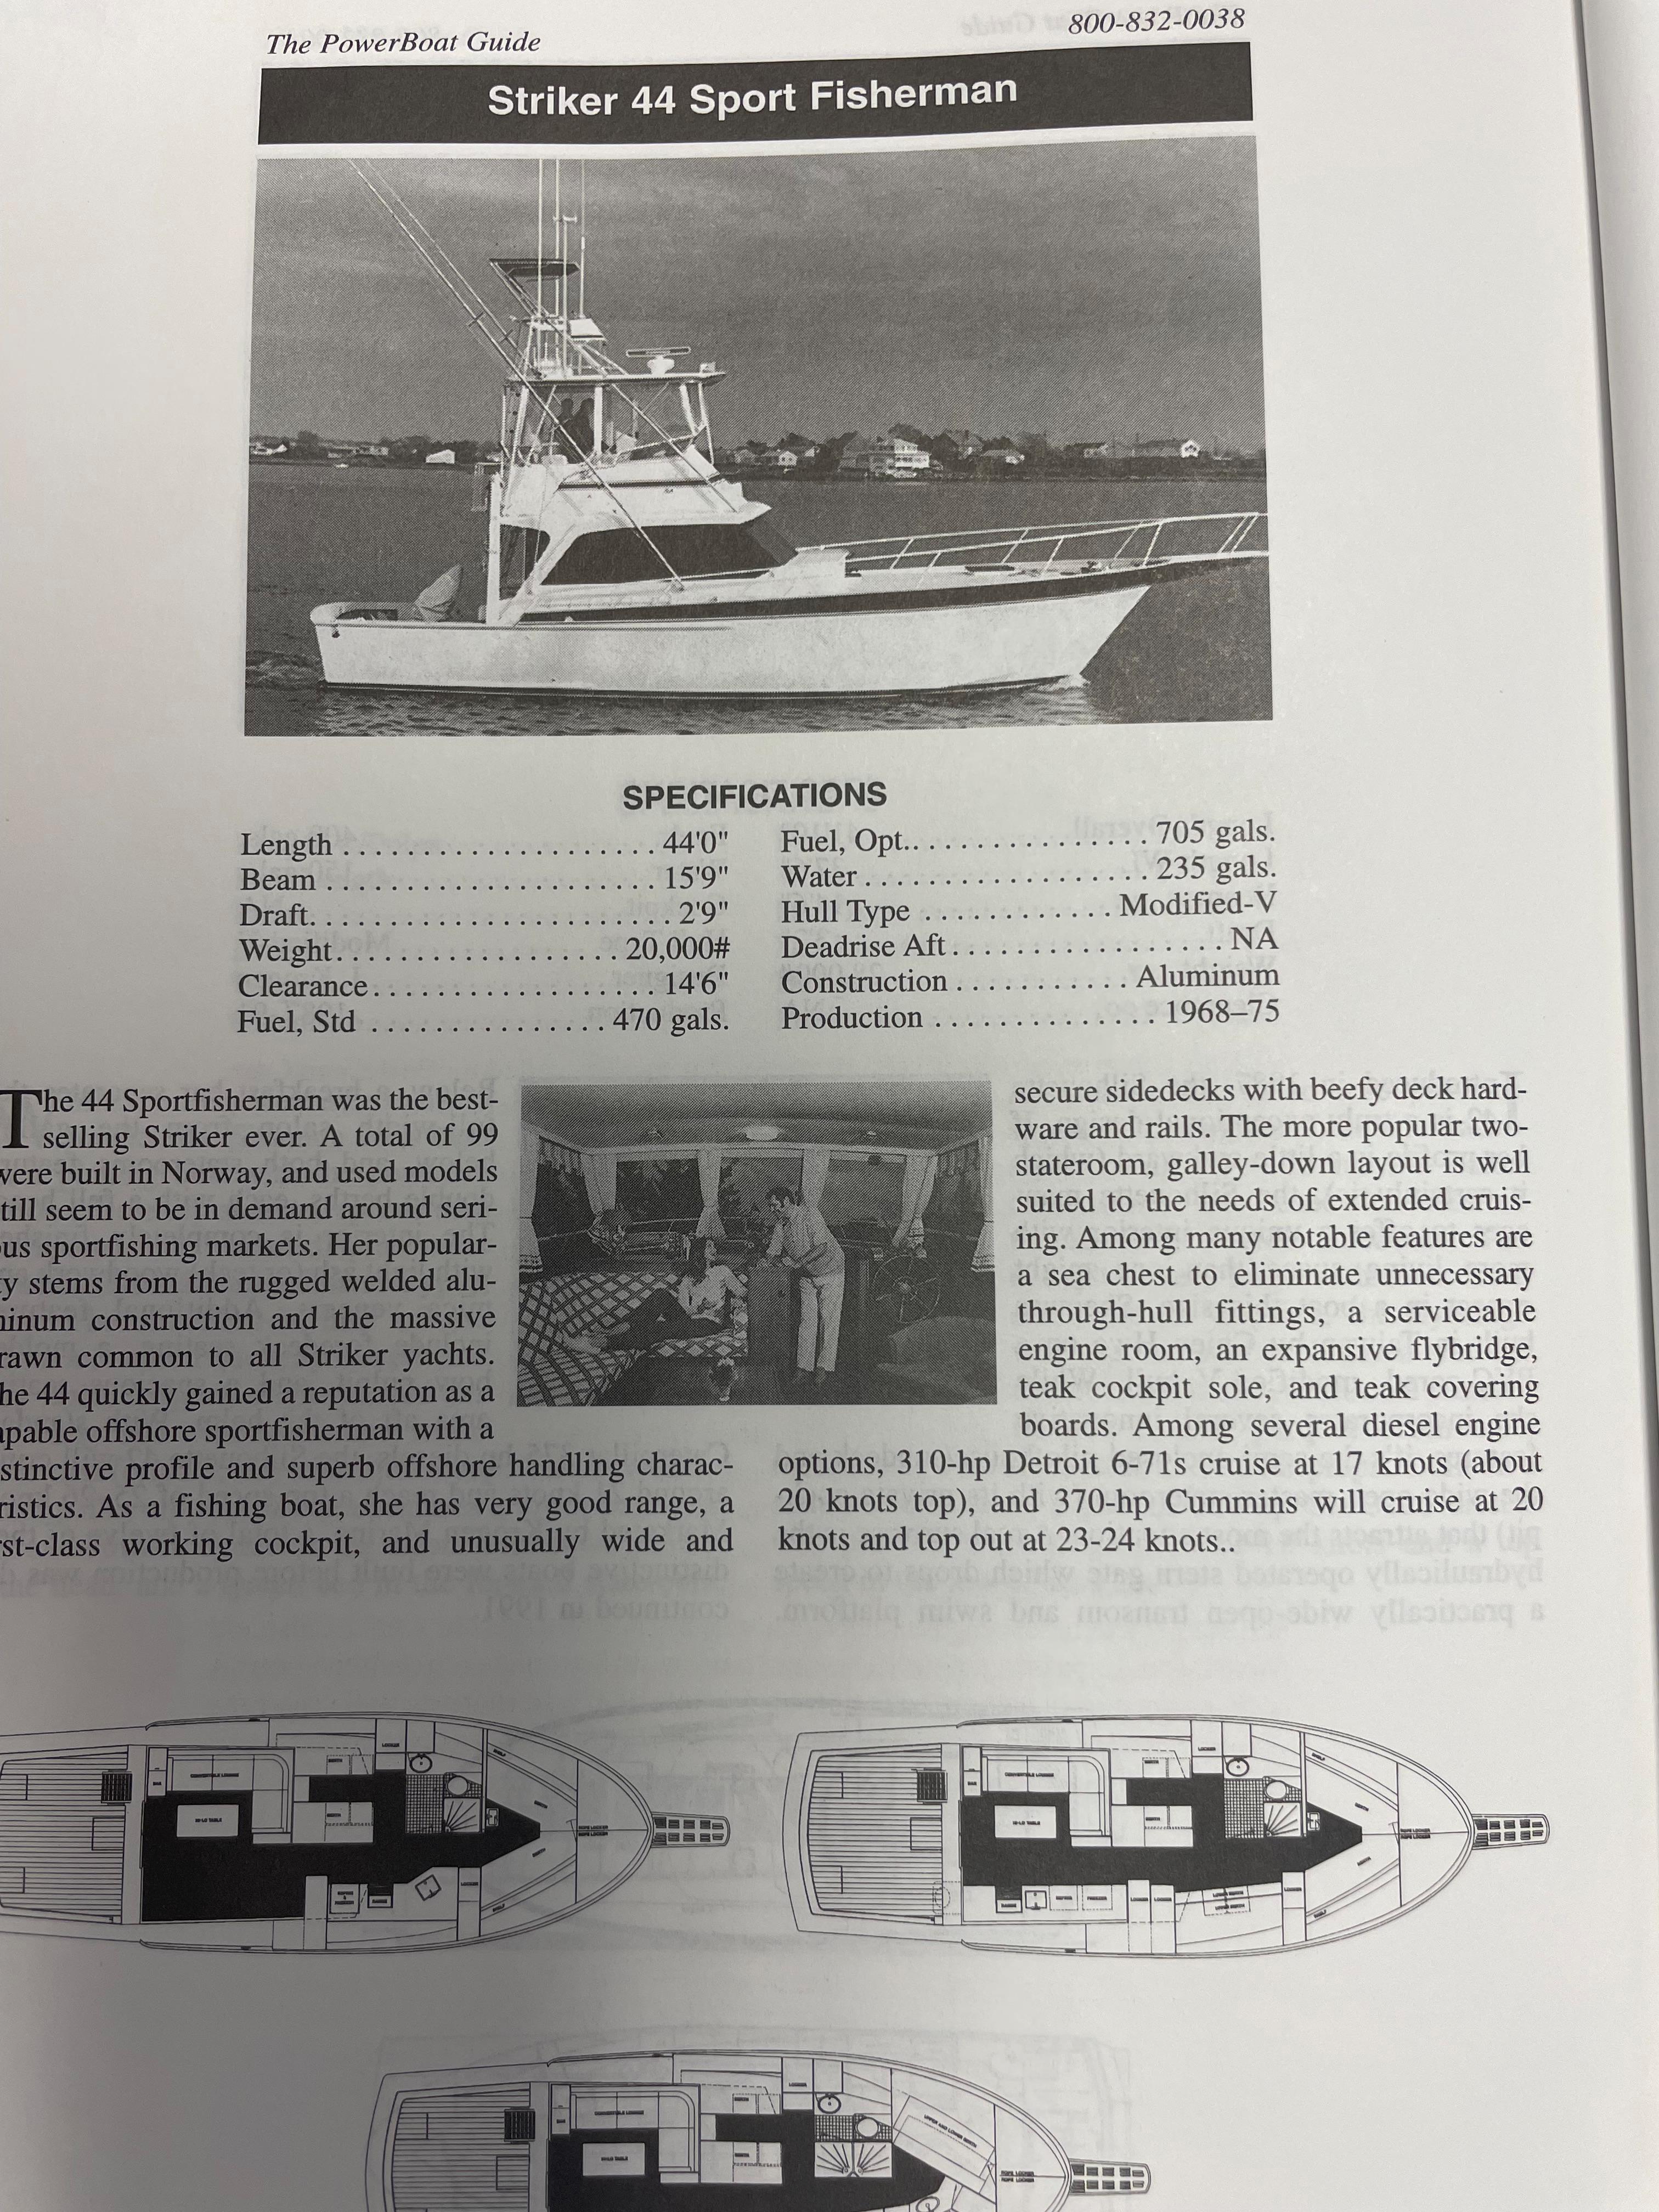 1973 Ontario Yachts Viking — For Sale — Sailboat Guide